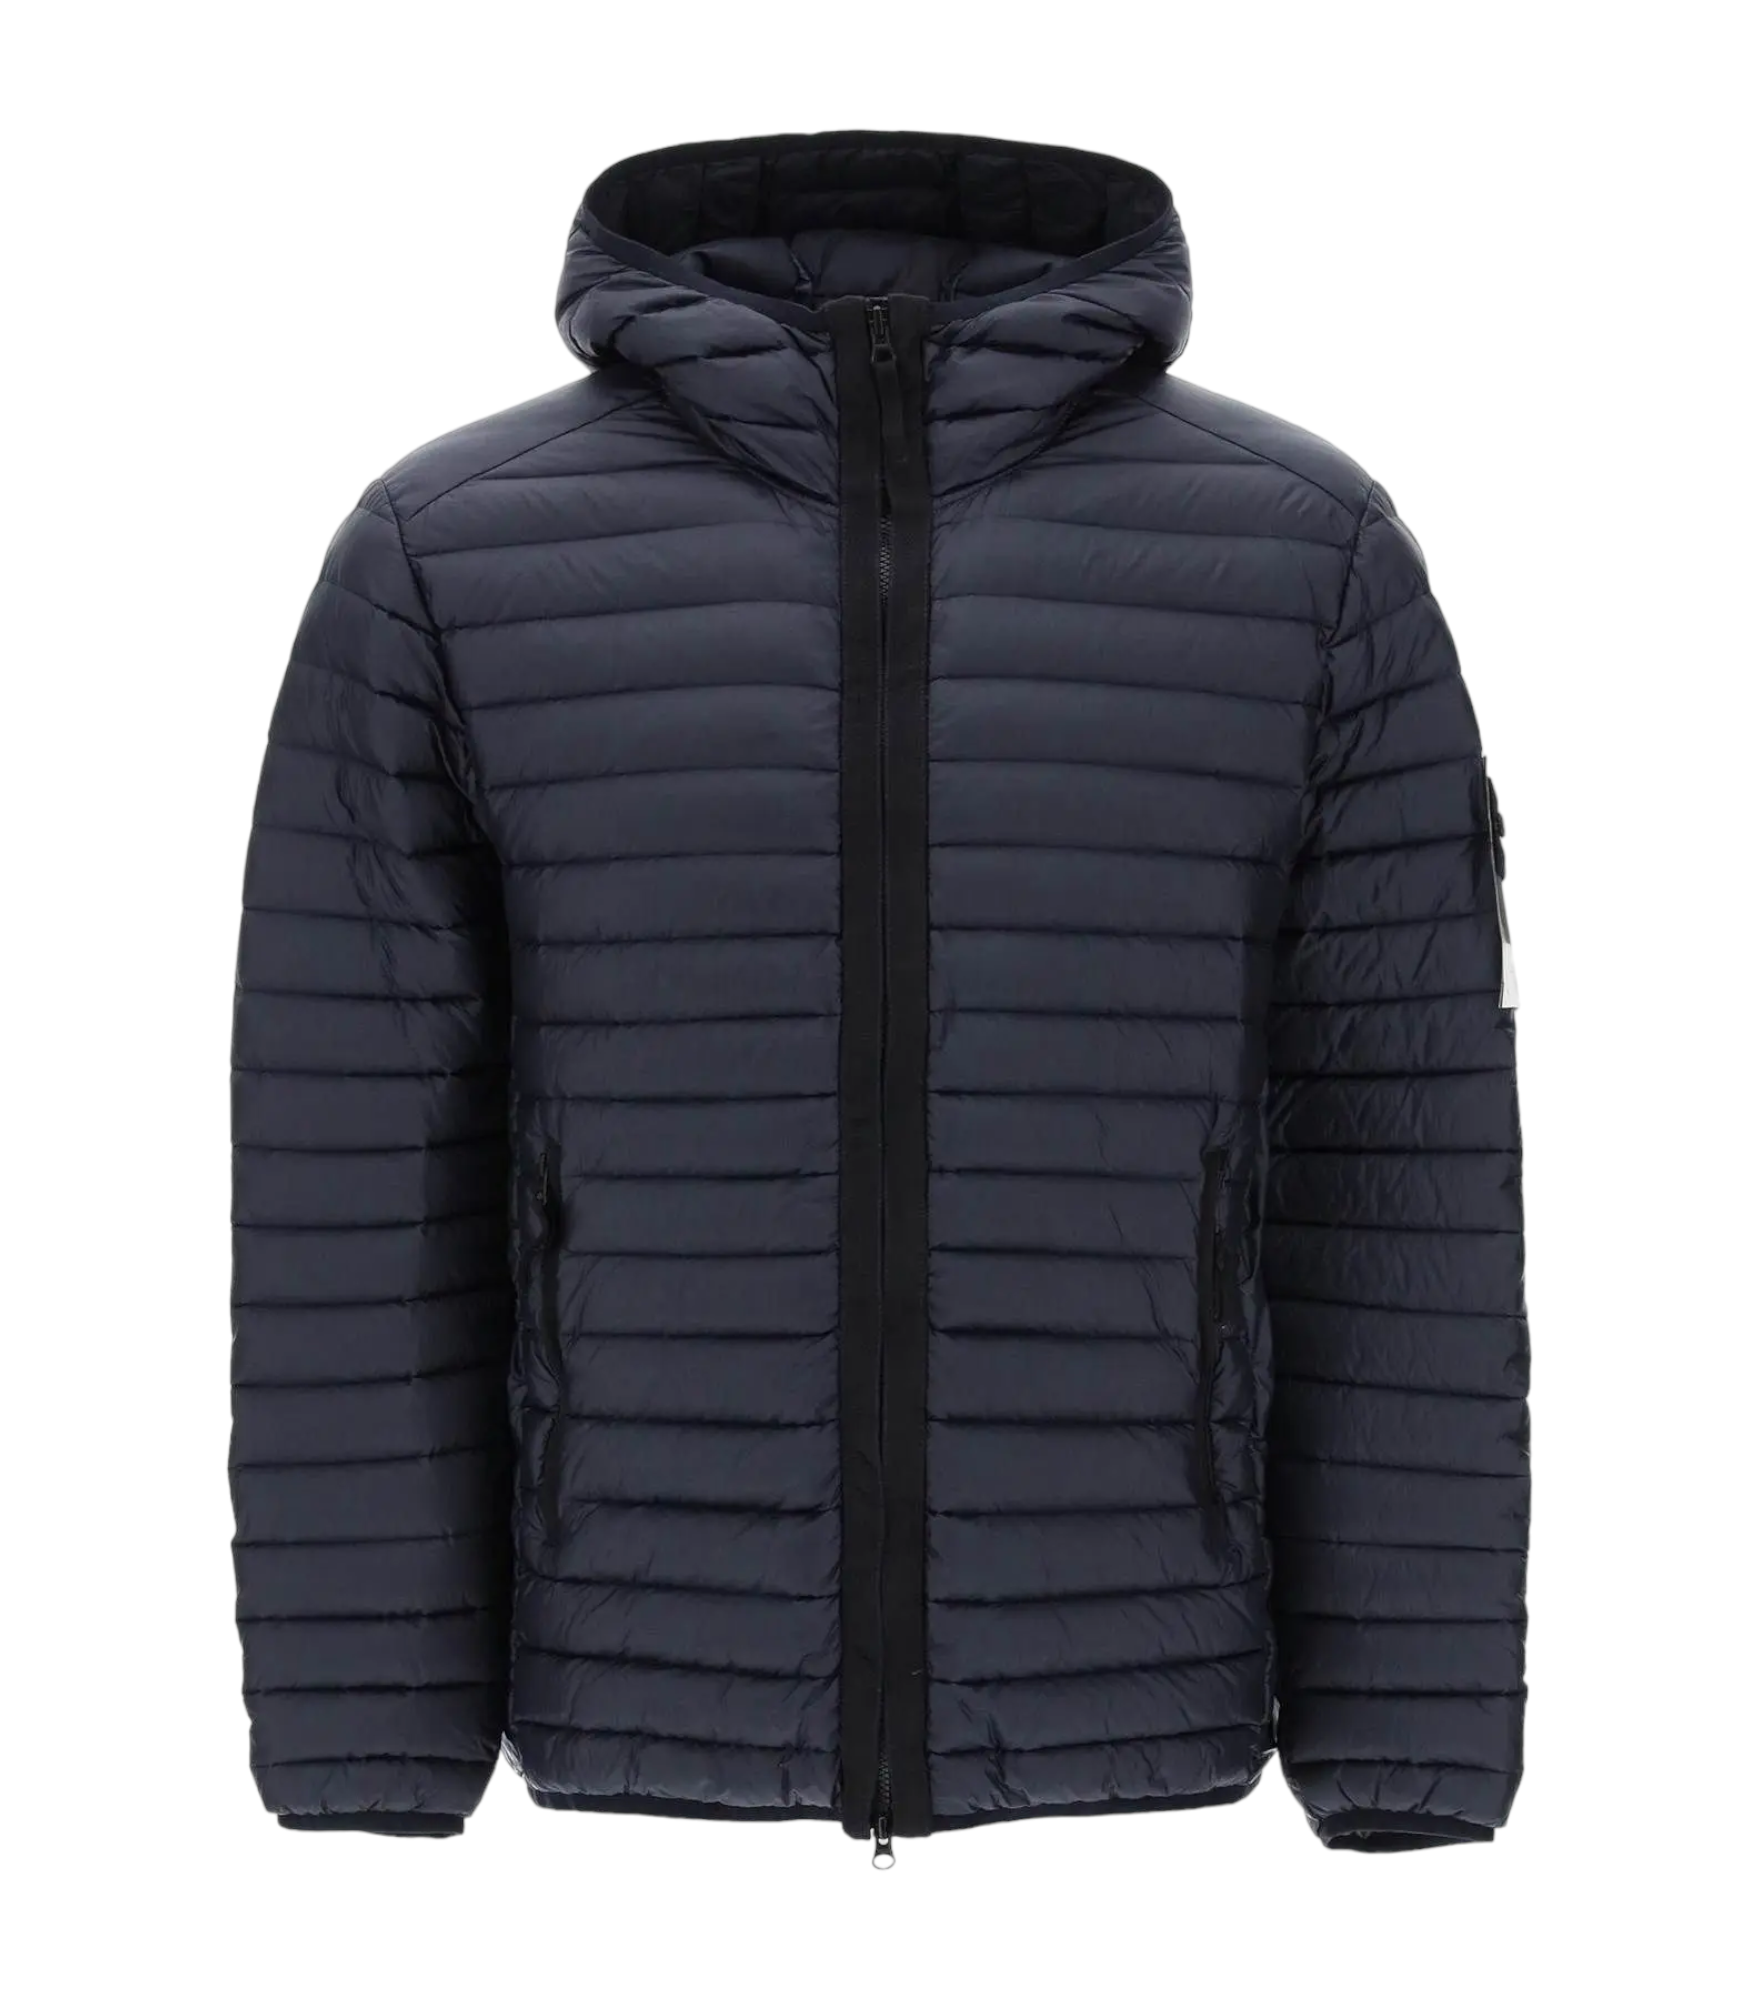 Stone Island Packable Down Hooded Jacket in Recycled Nylon